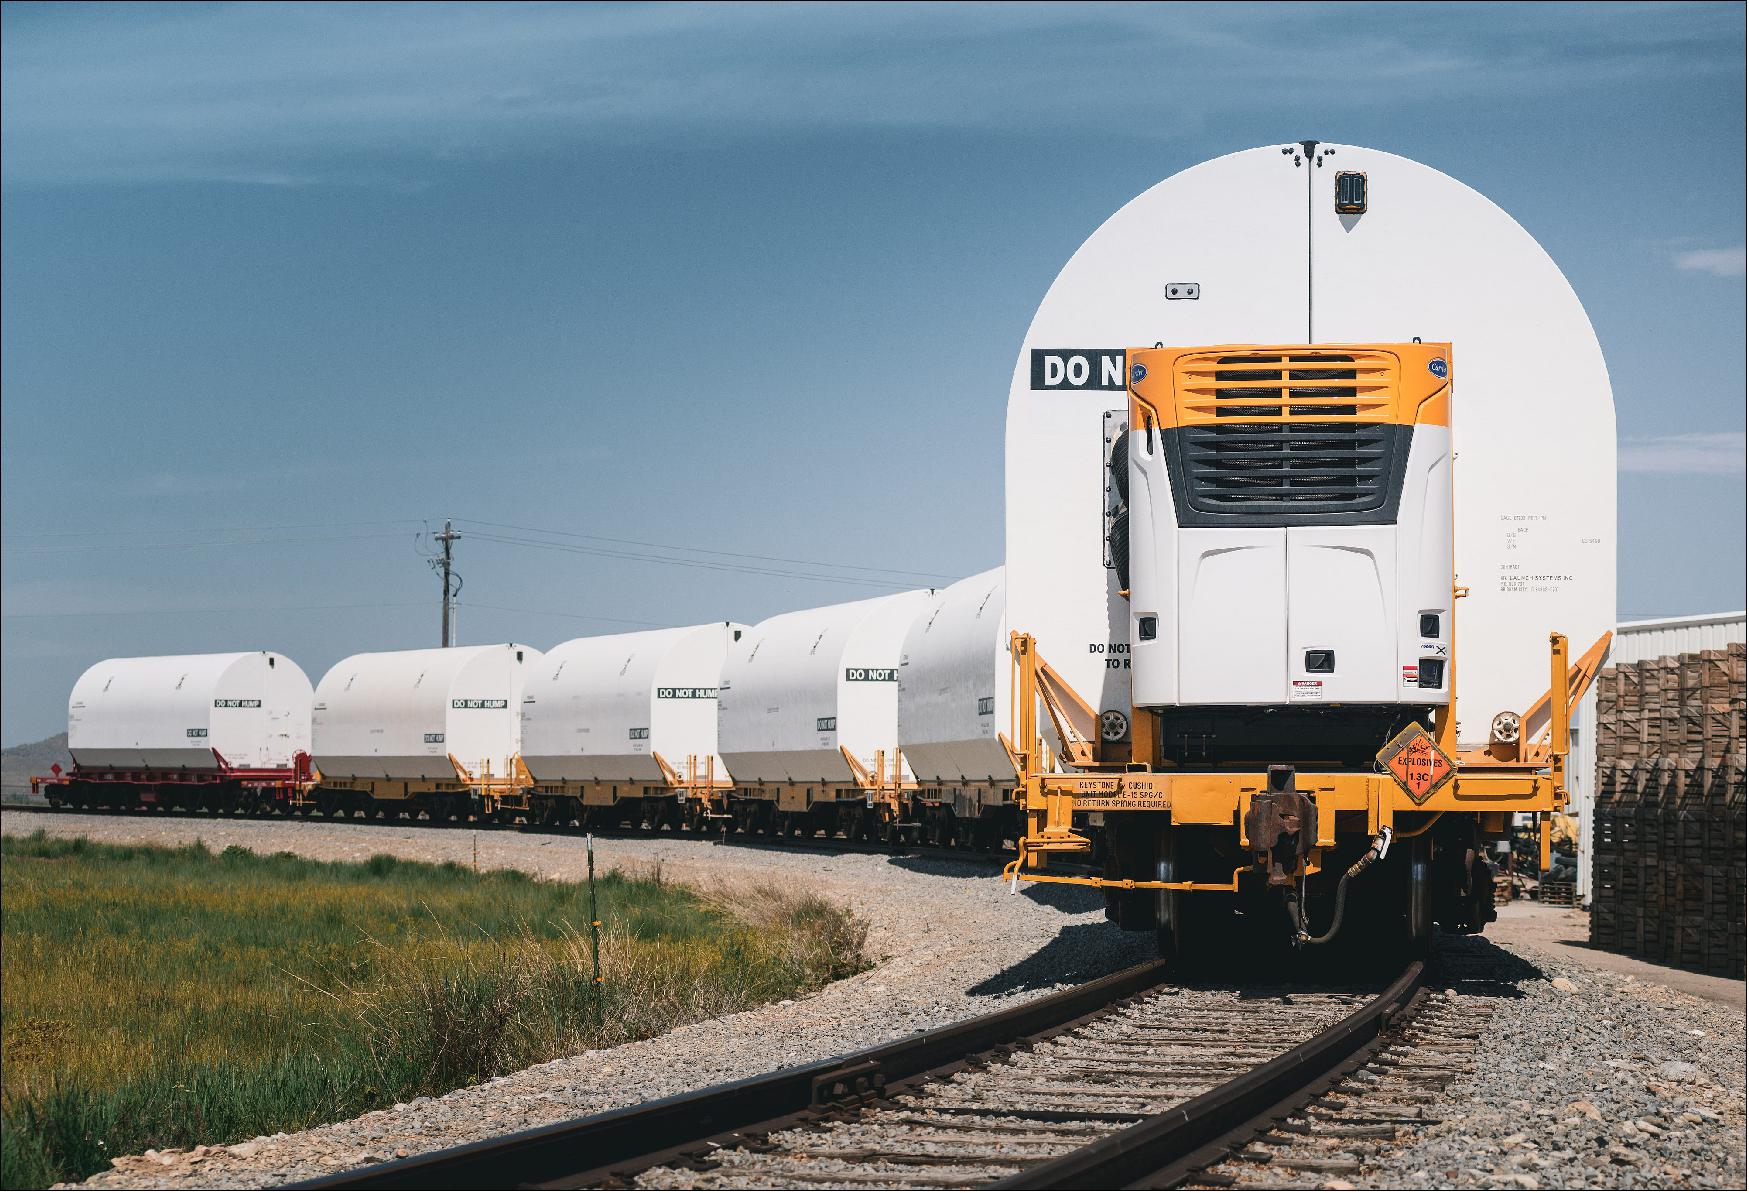 Figure 42: A train carrying the rocket motors for NASA’s Space Launch System rocket after departing a Northrop Grumman manufacturing facility in Utah for NASA’s Kennedy Space Center in Florida on June 5, 2020. The 10 booster segments will power Artemis I, the first mission of NASA’s Artemis program, to the Moon. The 180-ton booster segments are transported in specially outfitted railcars to make the 2,800-mile trip across eight states to Kennedy (image credit: Northrop Grumman)